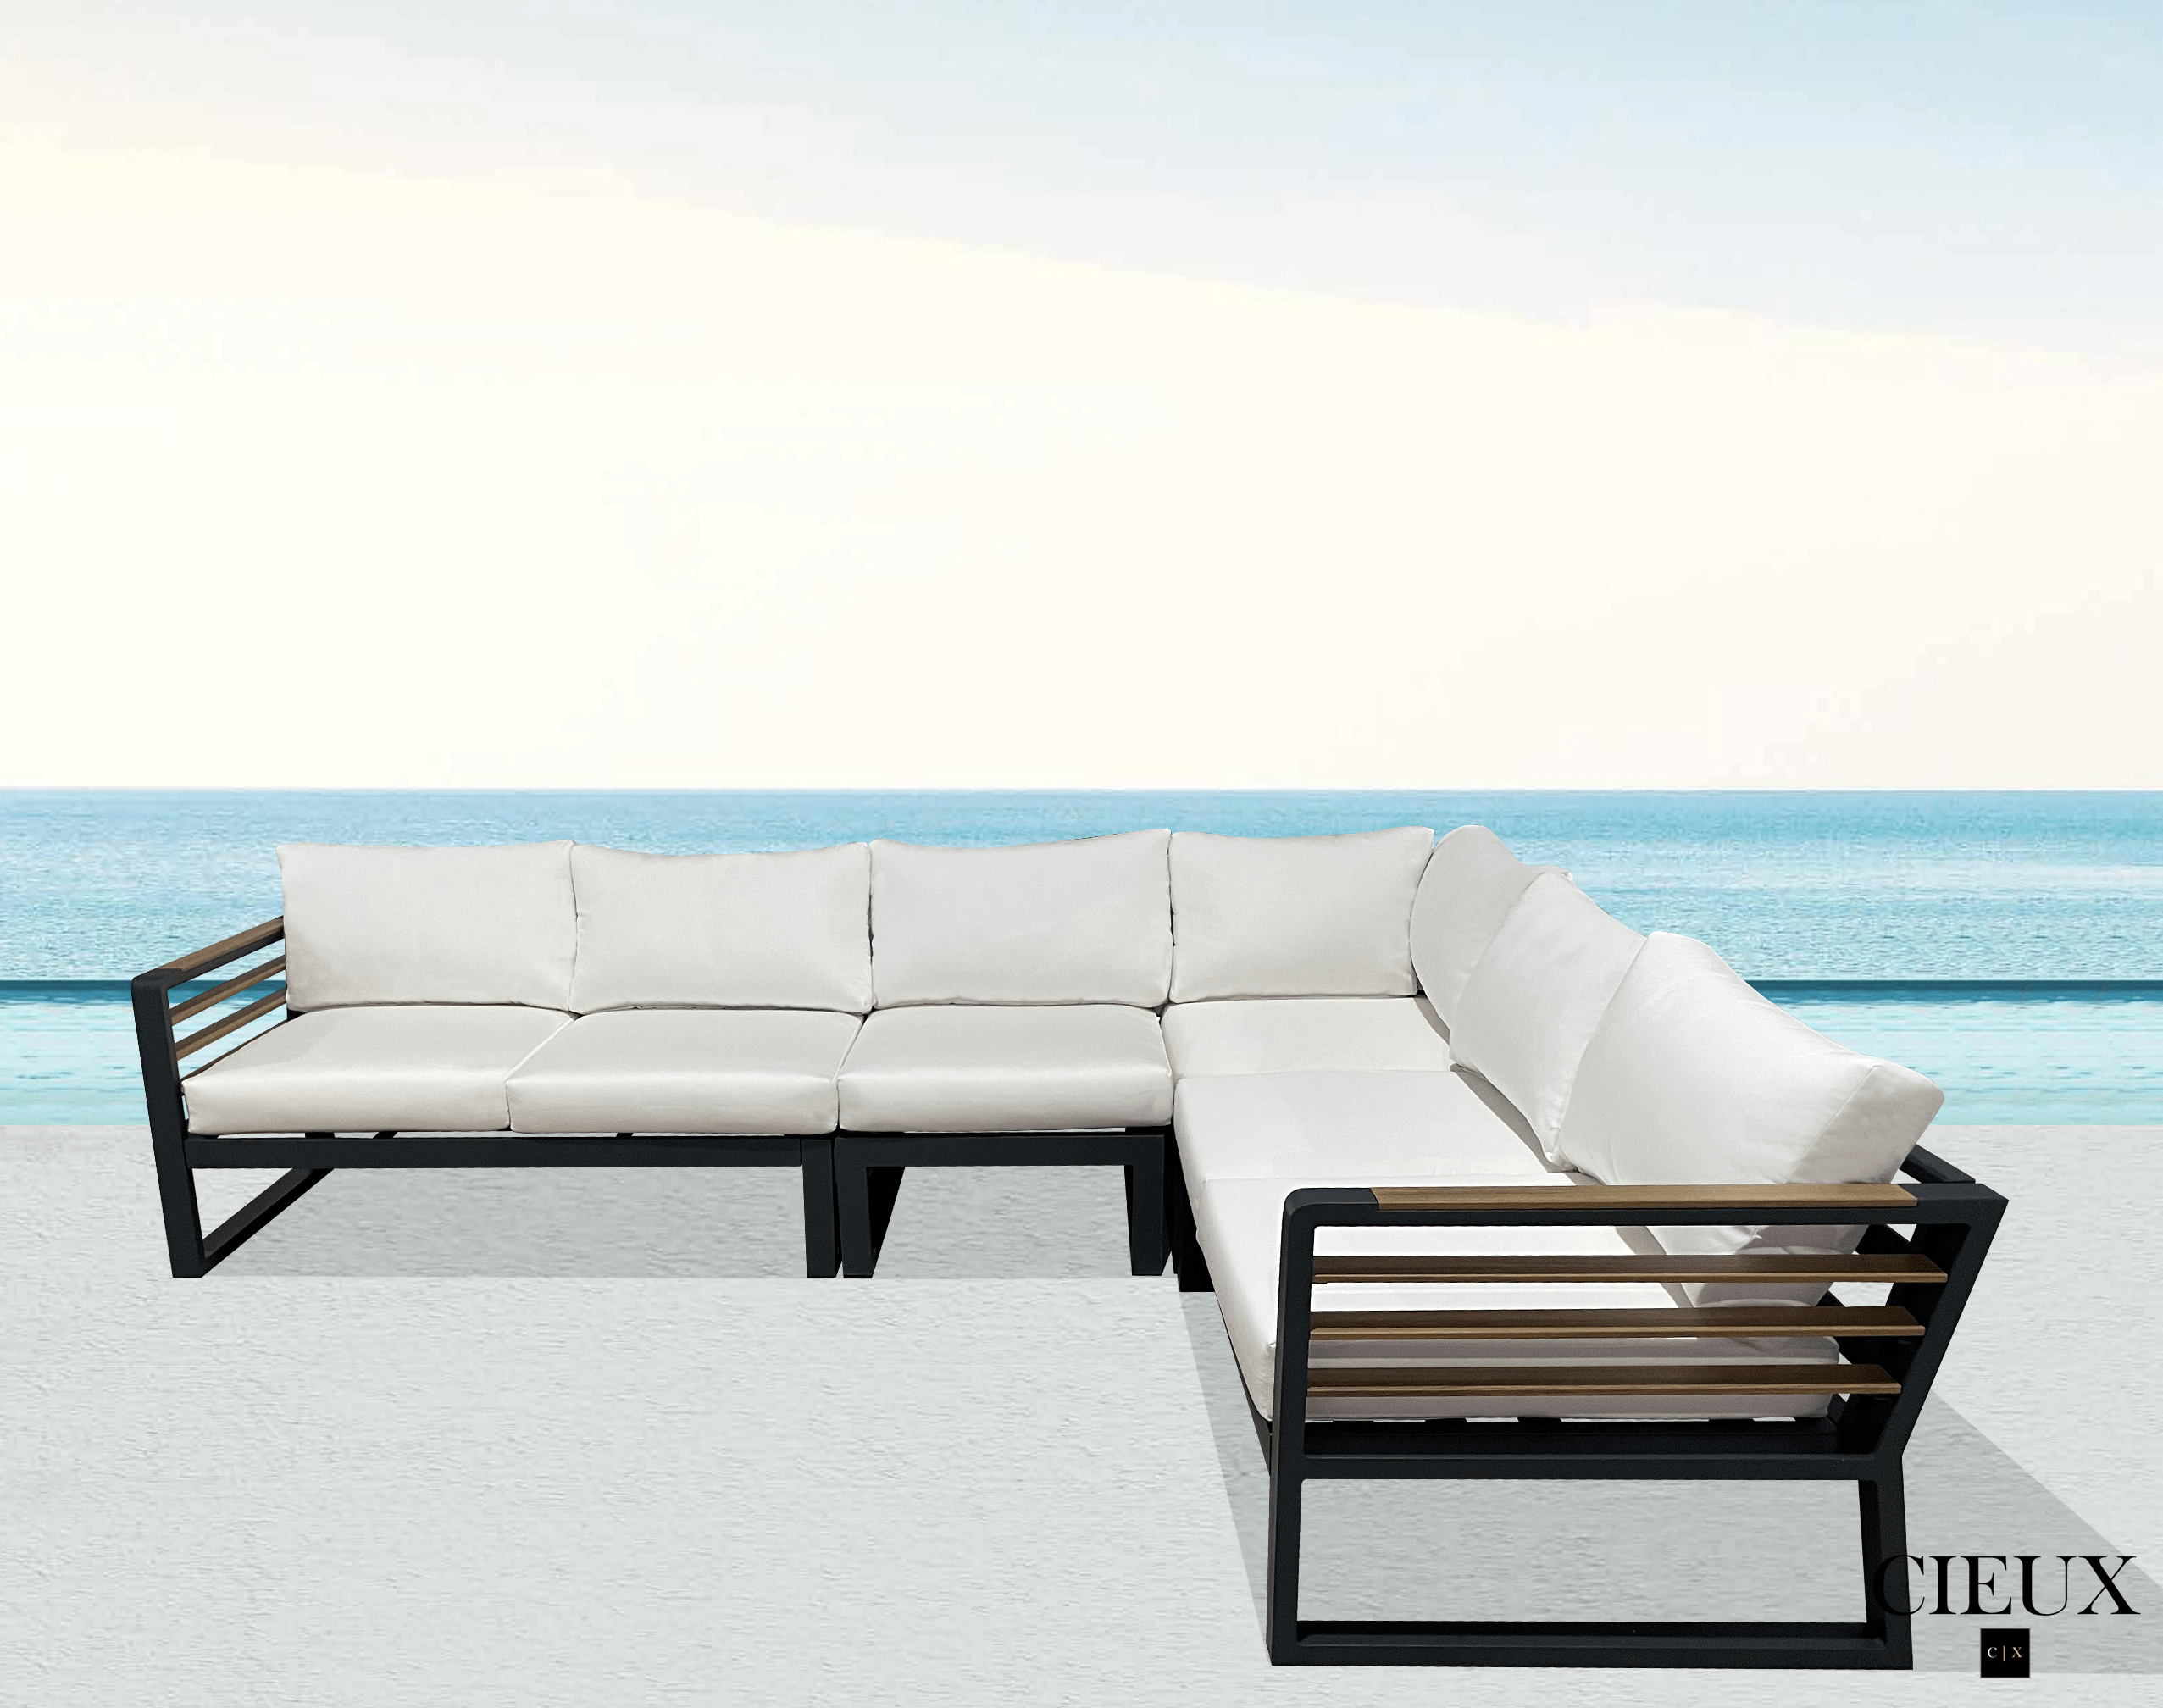 Pending - Cieux Avignon Outdoor Patio Aluminum Metal L-Shaped Sectional Sofa in Black with Sunbrella Cushions - Available in 2 Colours